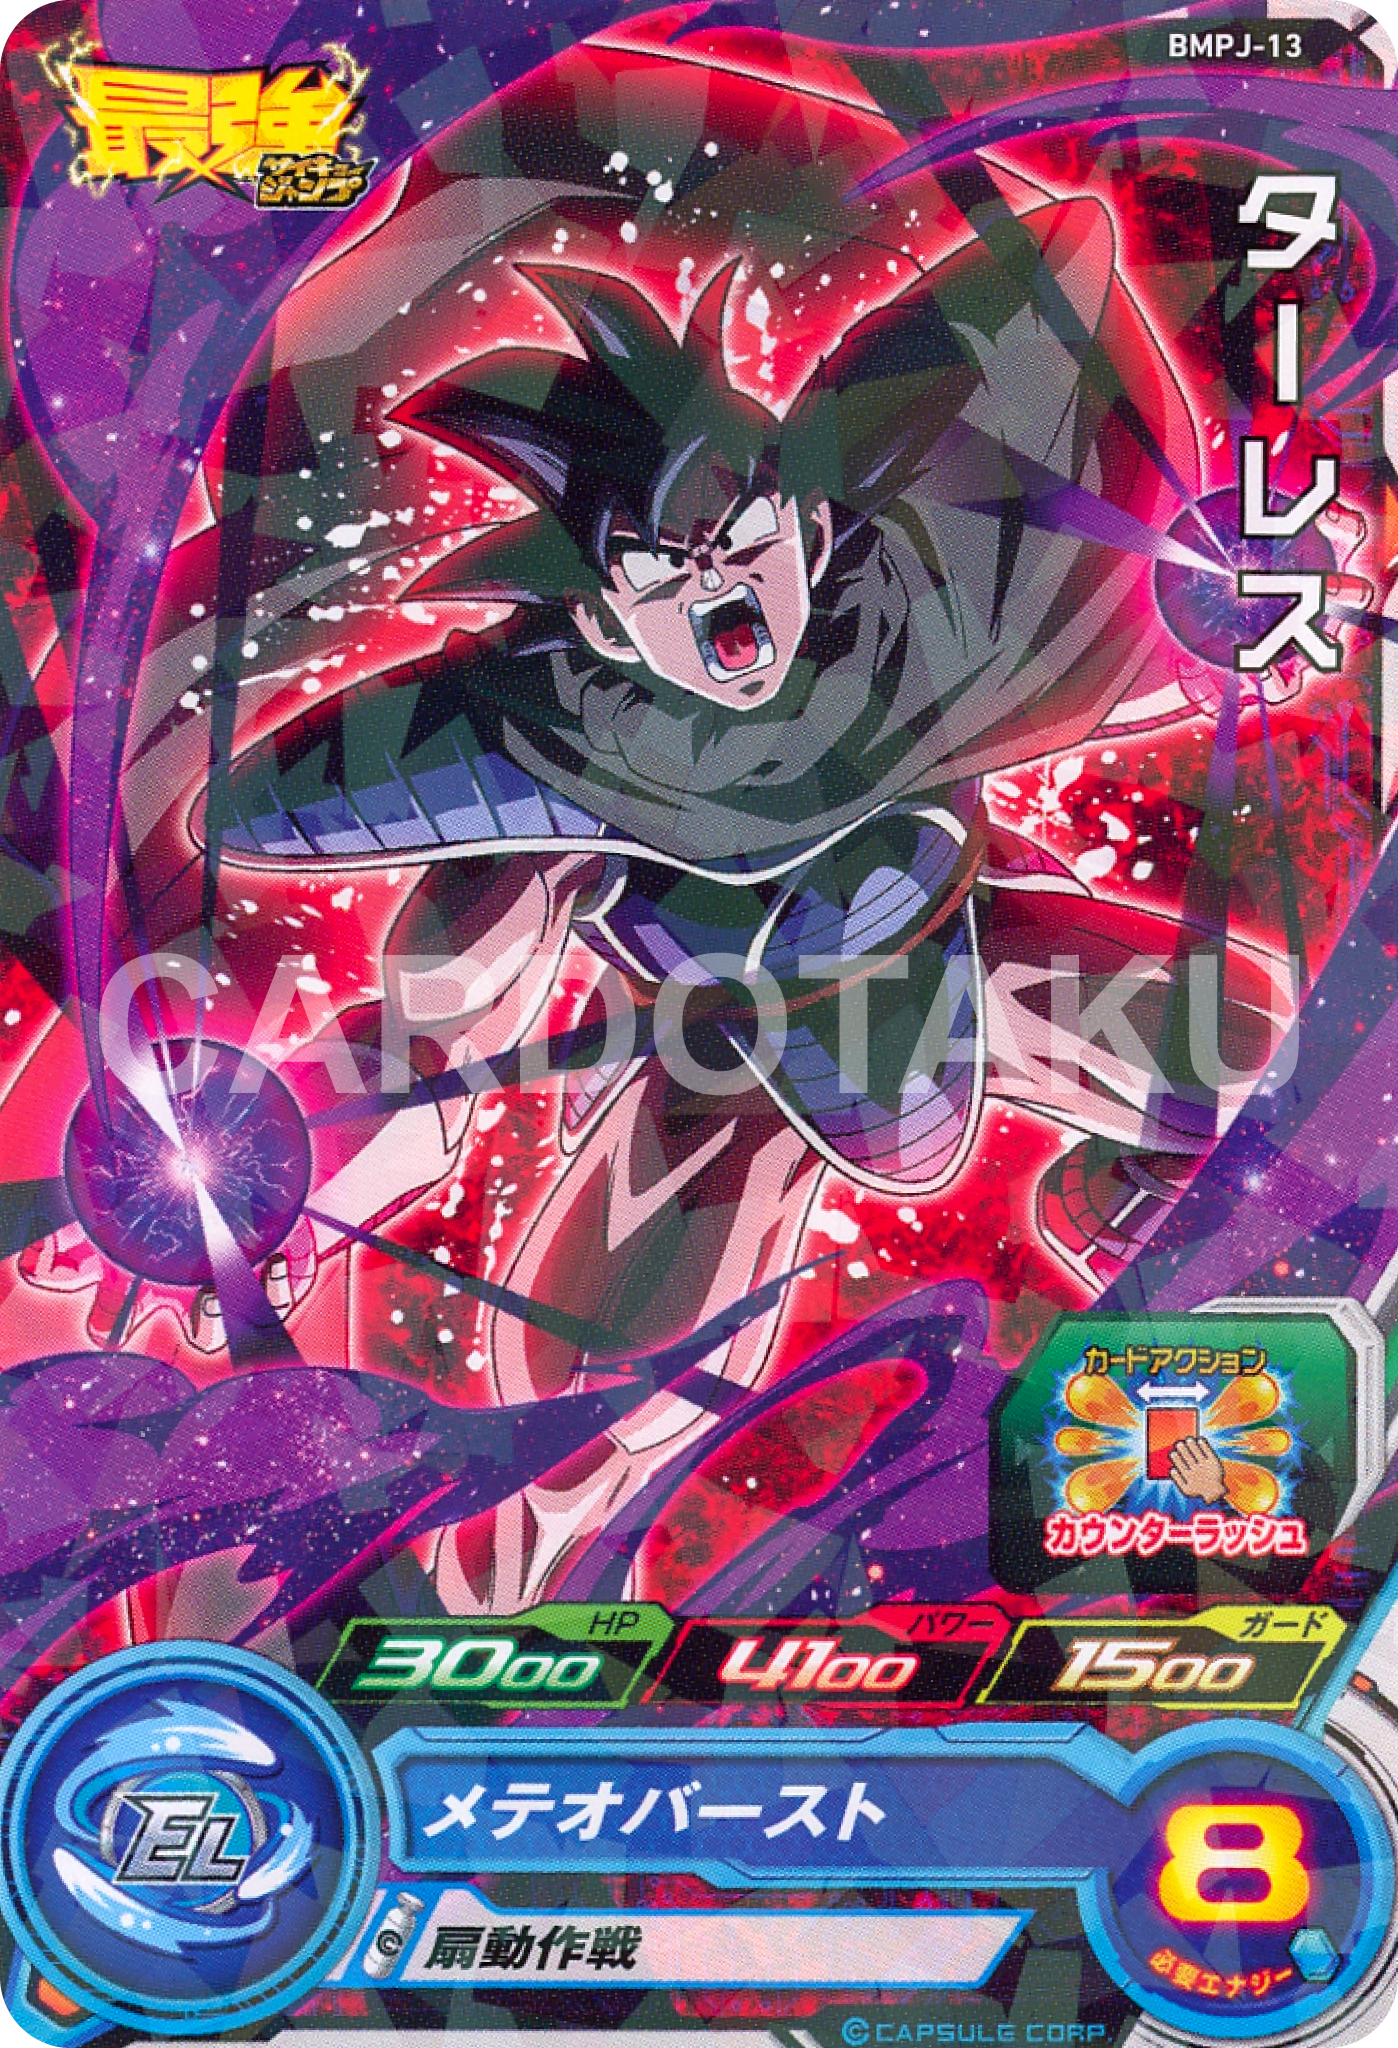 SUPER DRAGON BALL HEROES BMPJ-13  Promotional card sold with the September 2020 issue of Saikyo Jump magazine released August 4 2020.  Turles